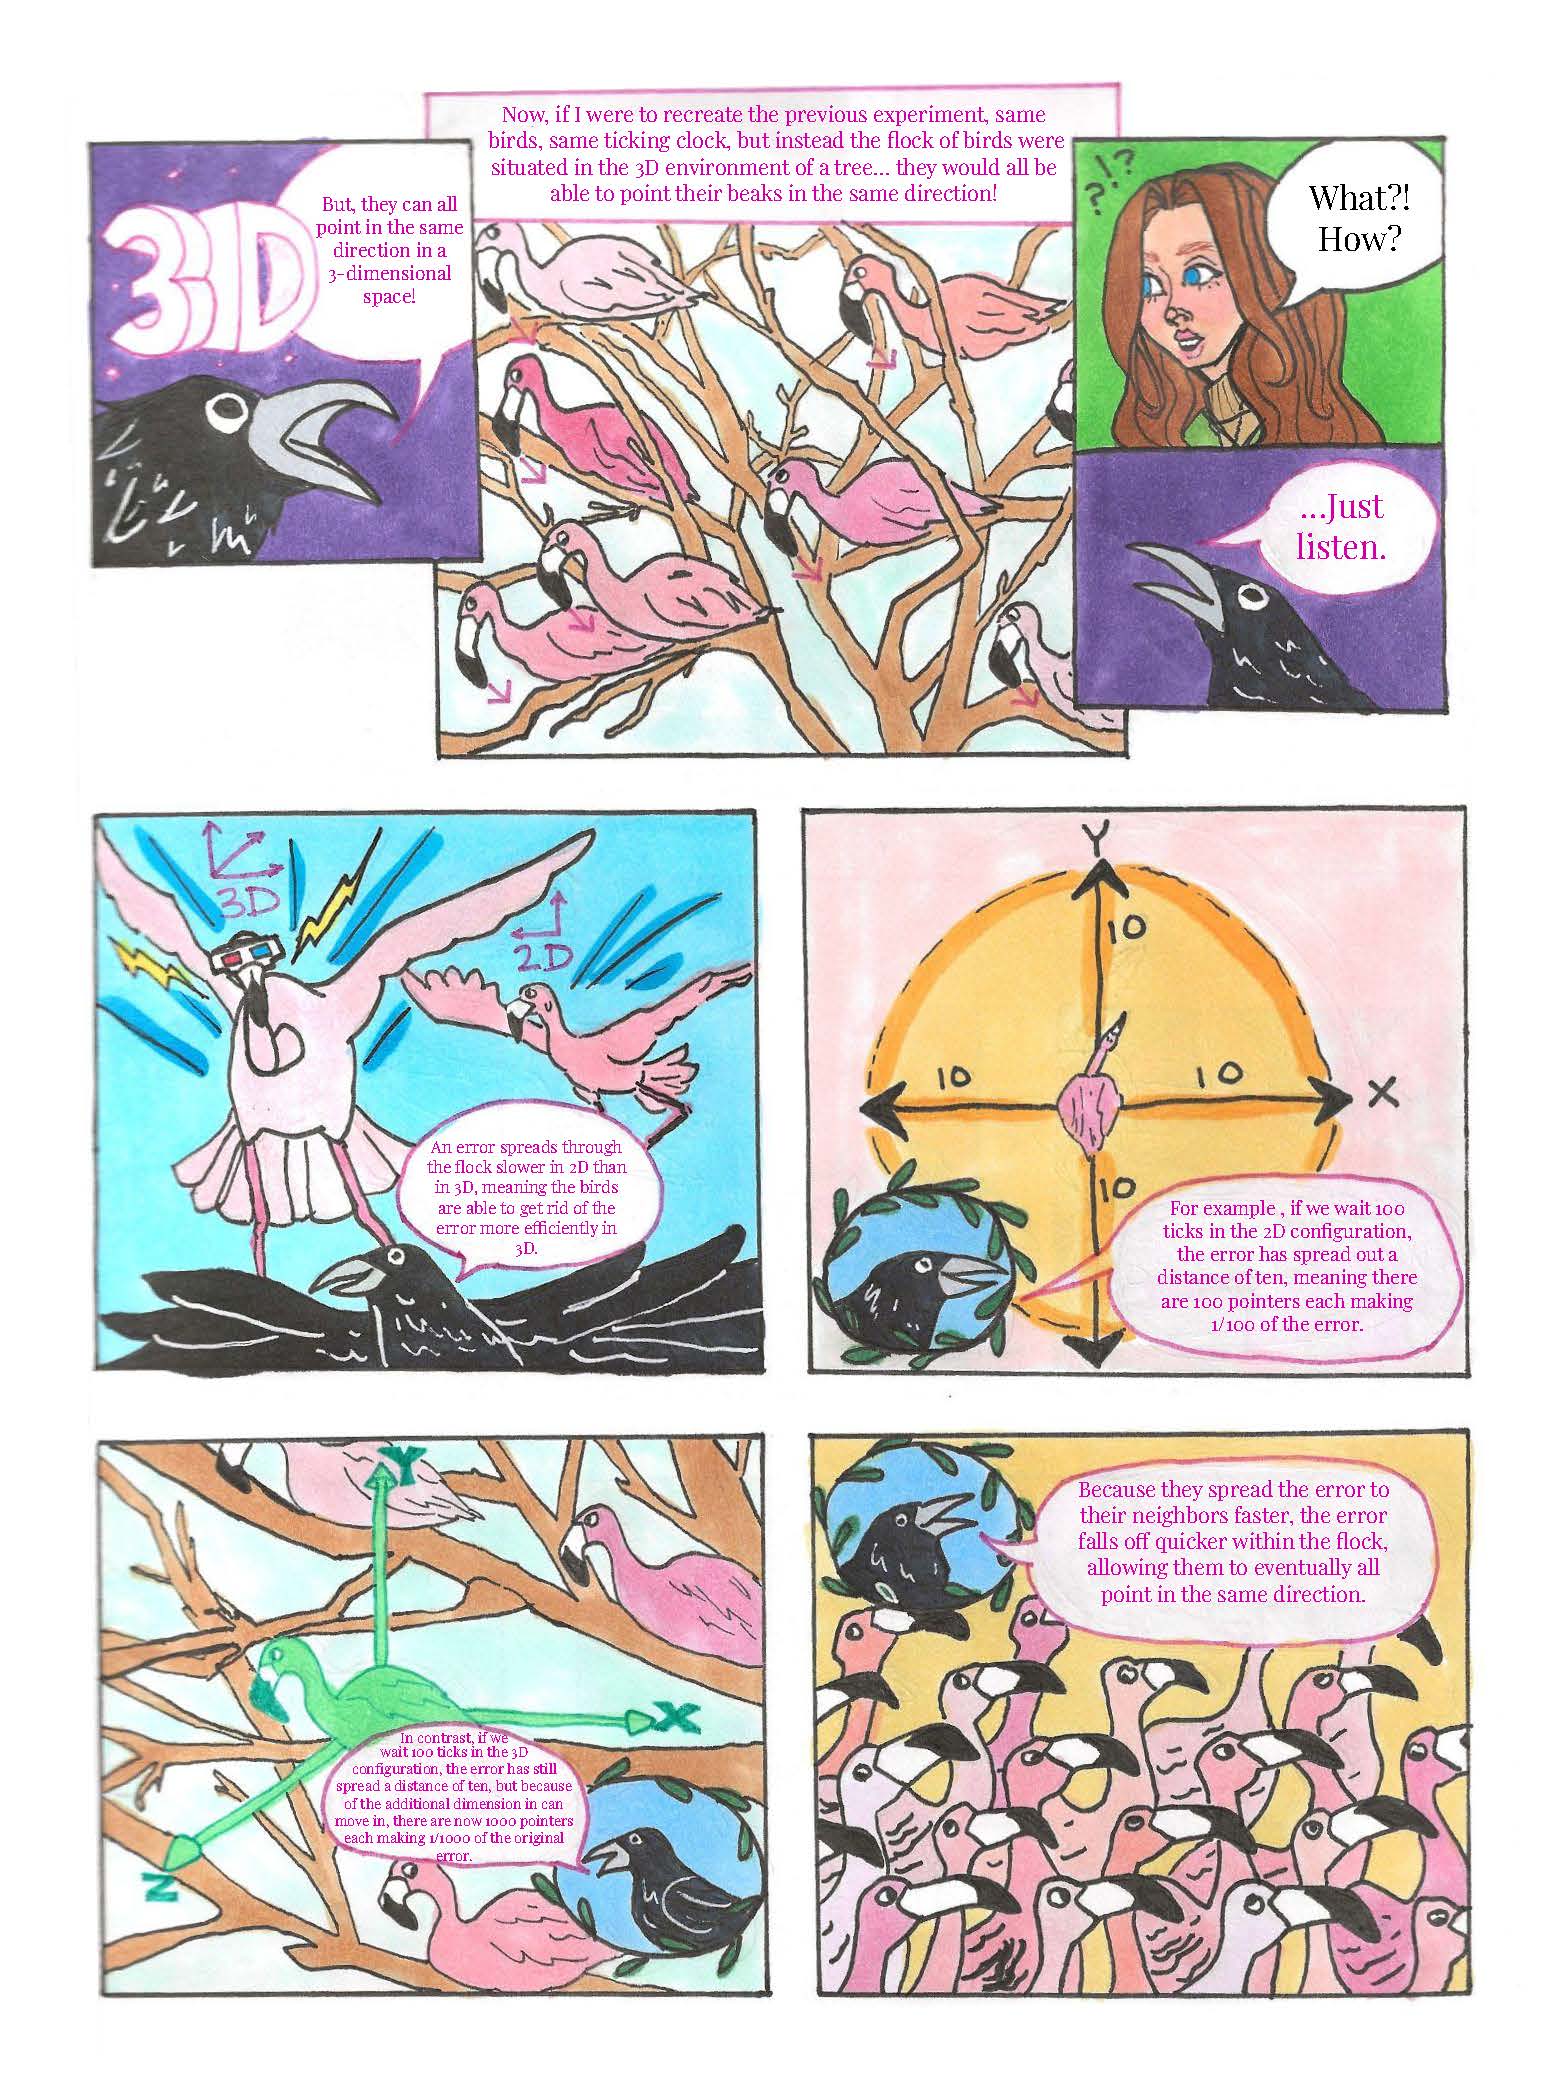 Flocking birds and active matter page 4